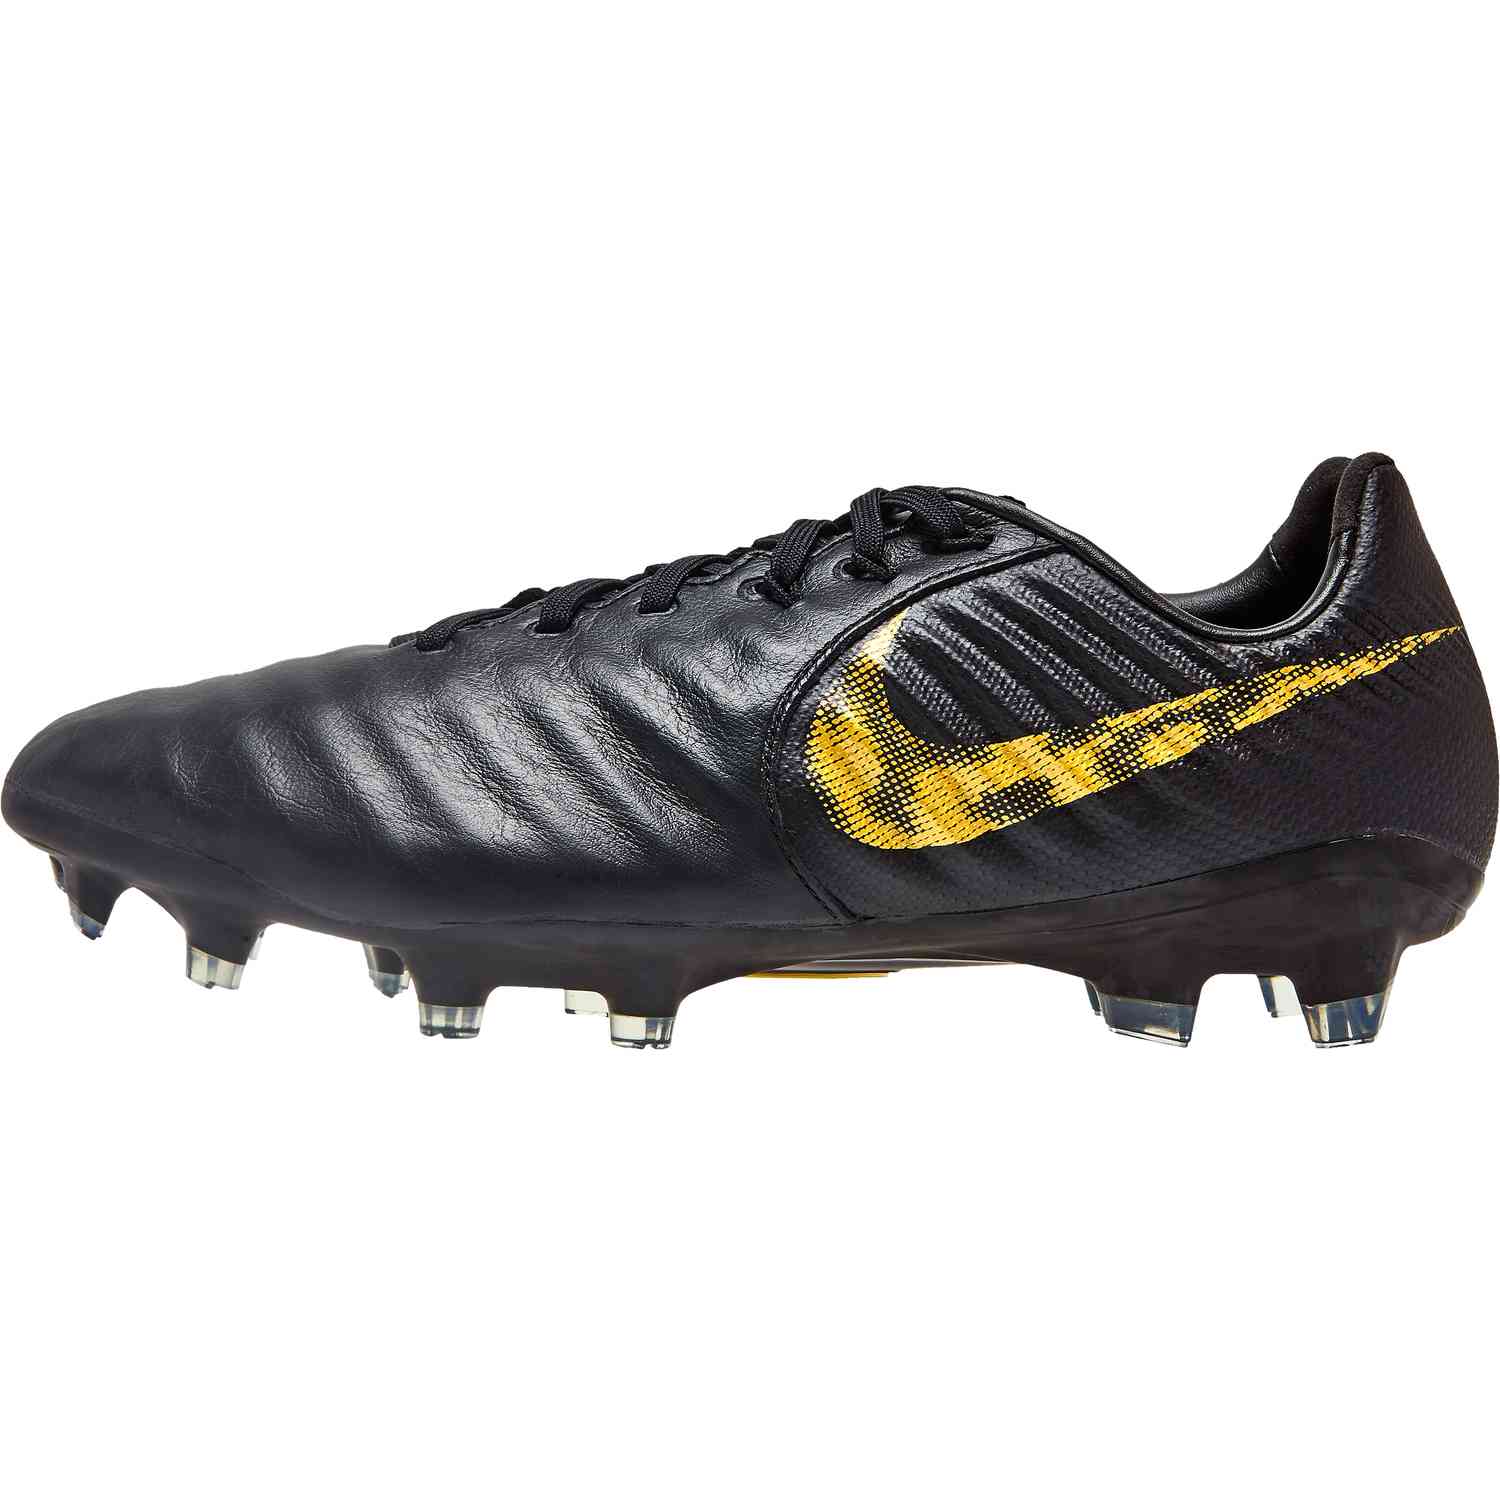 index convertible if you can Nike Tiempo Legend 7 Pro FG - Black Lux - SoccerPro